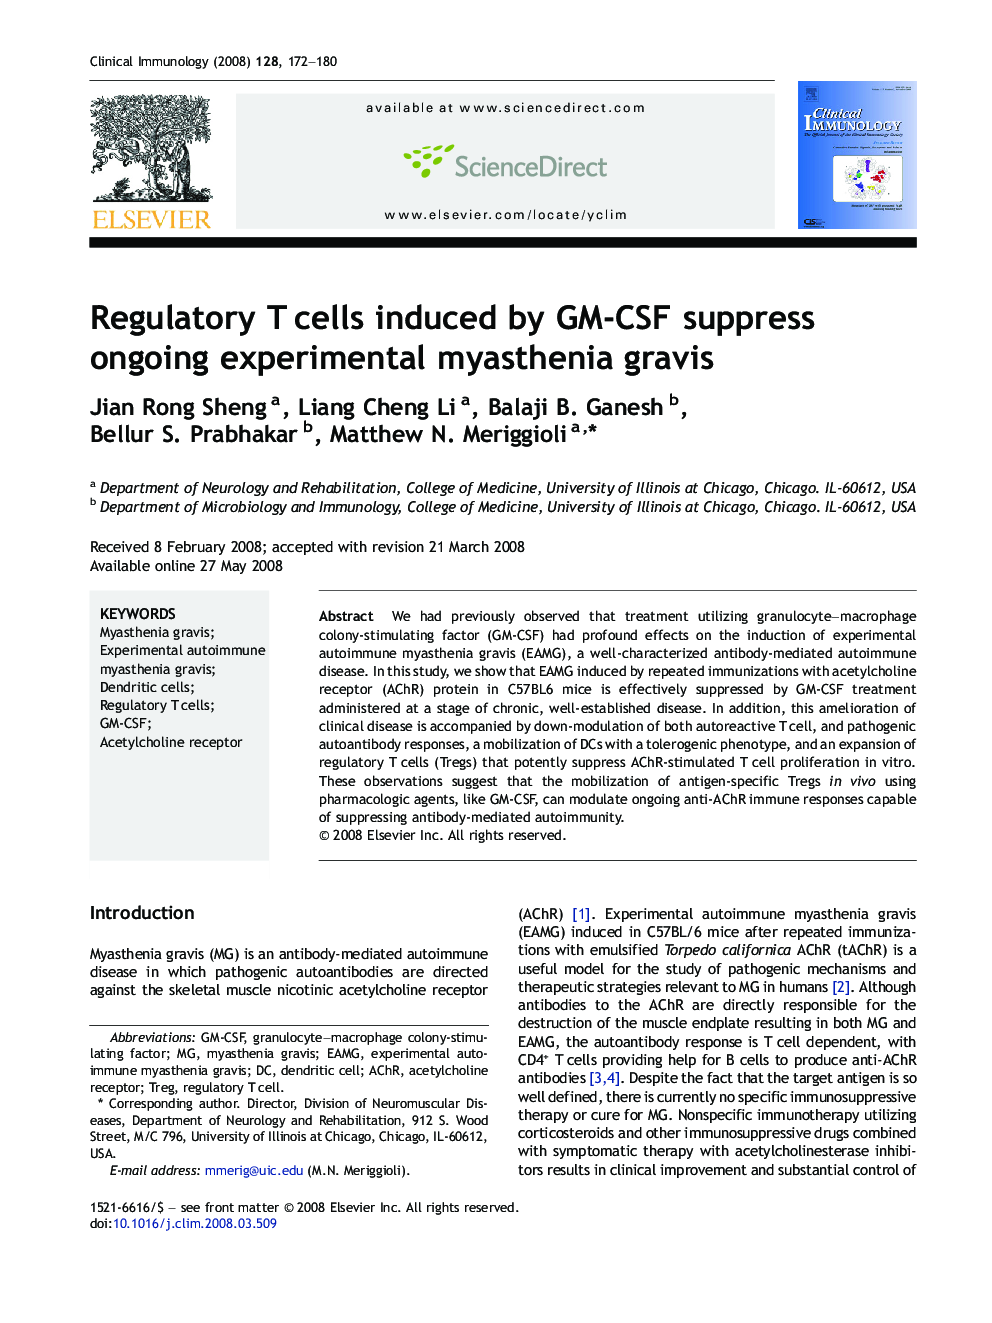 Regulatory T cells induced by GM-CSF suppress ongoing experimental myasthenia gravis